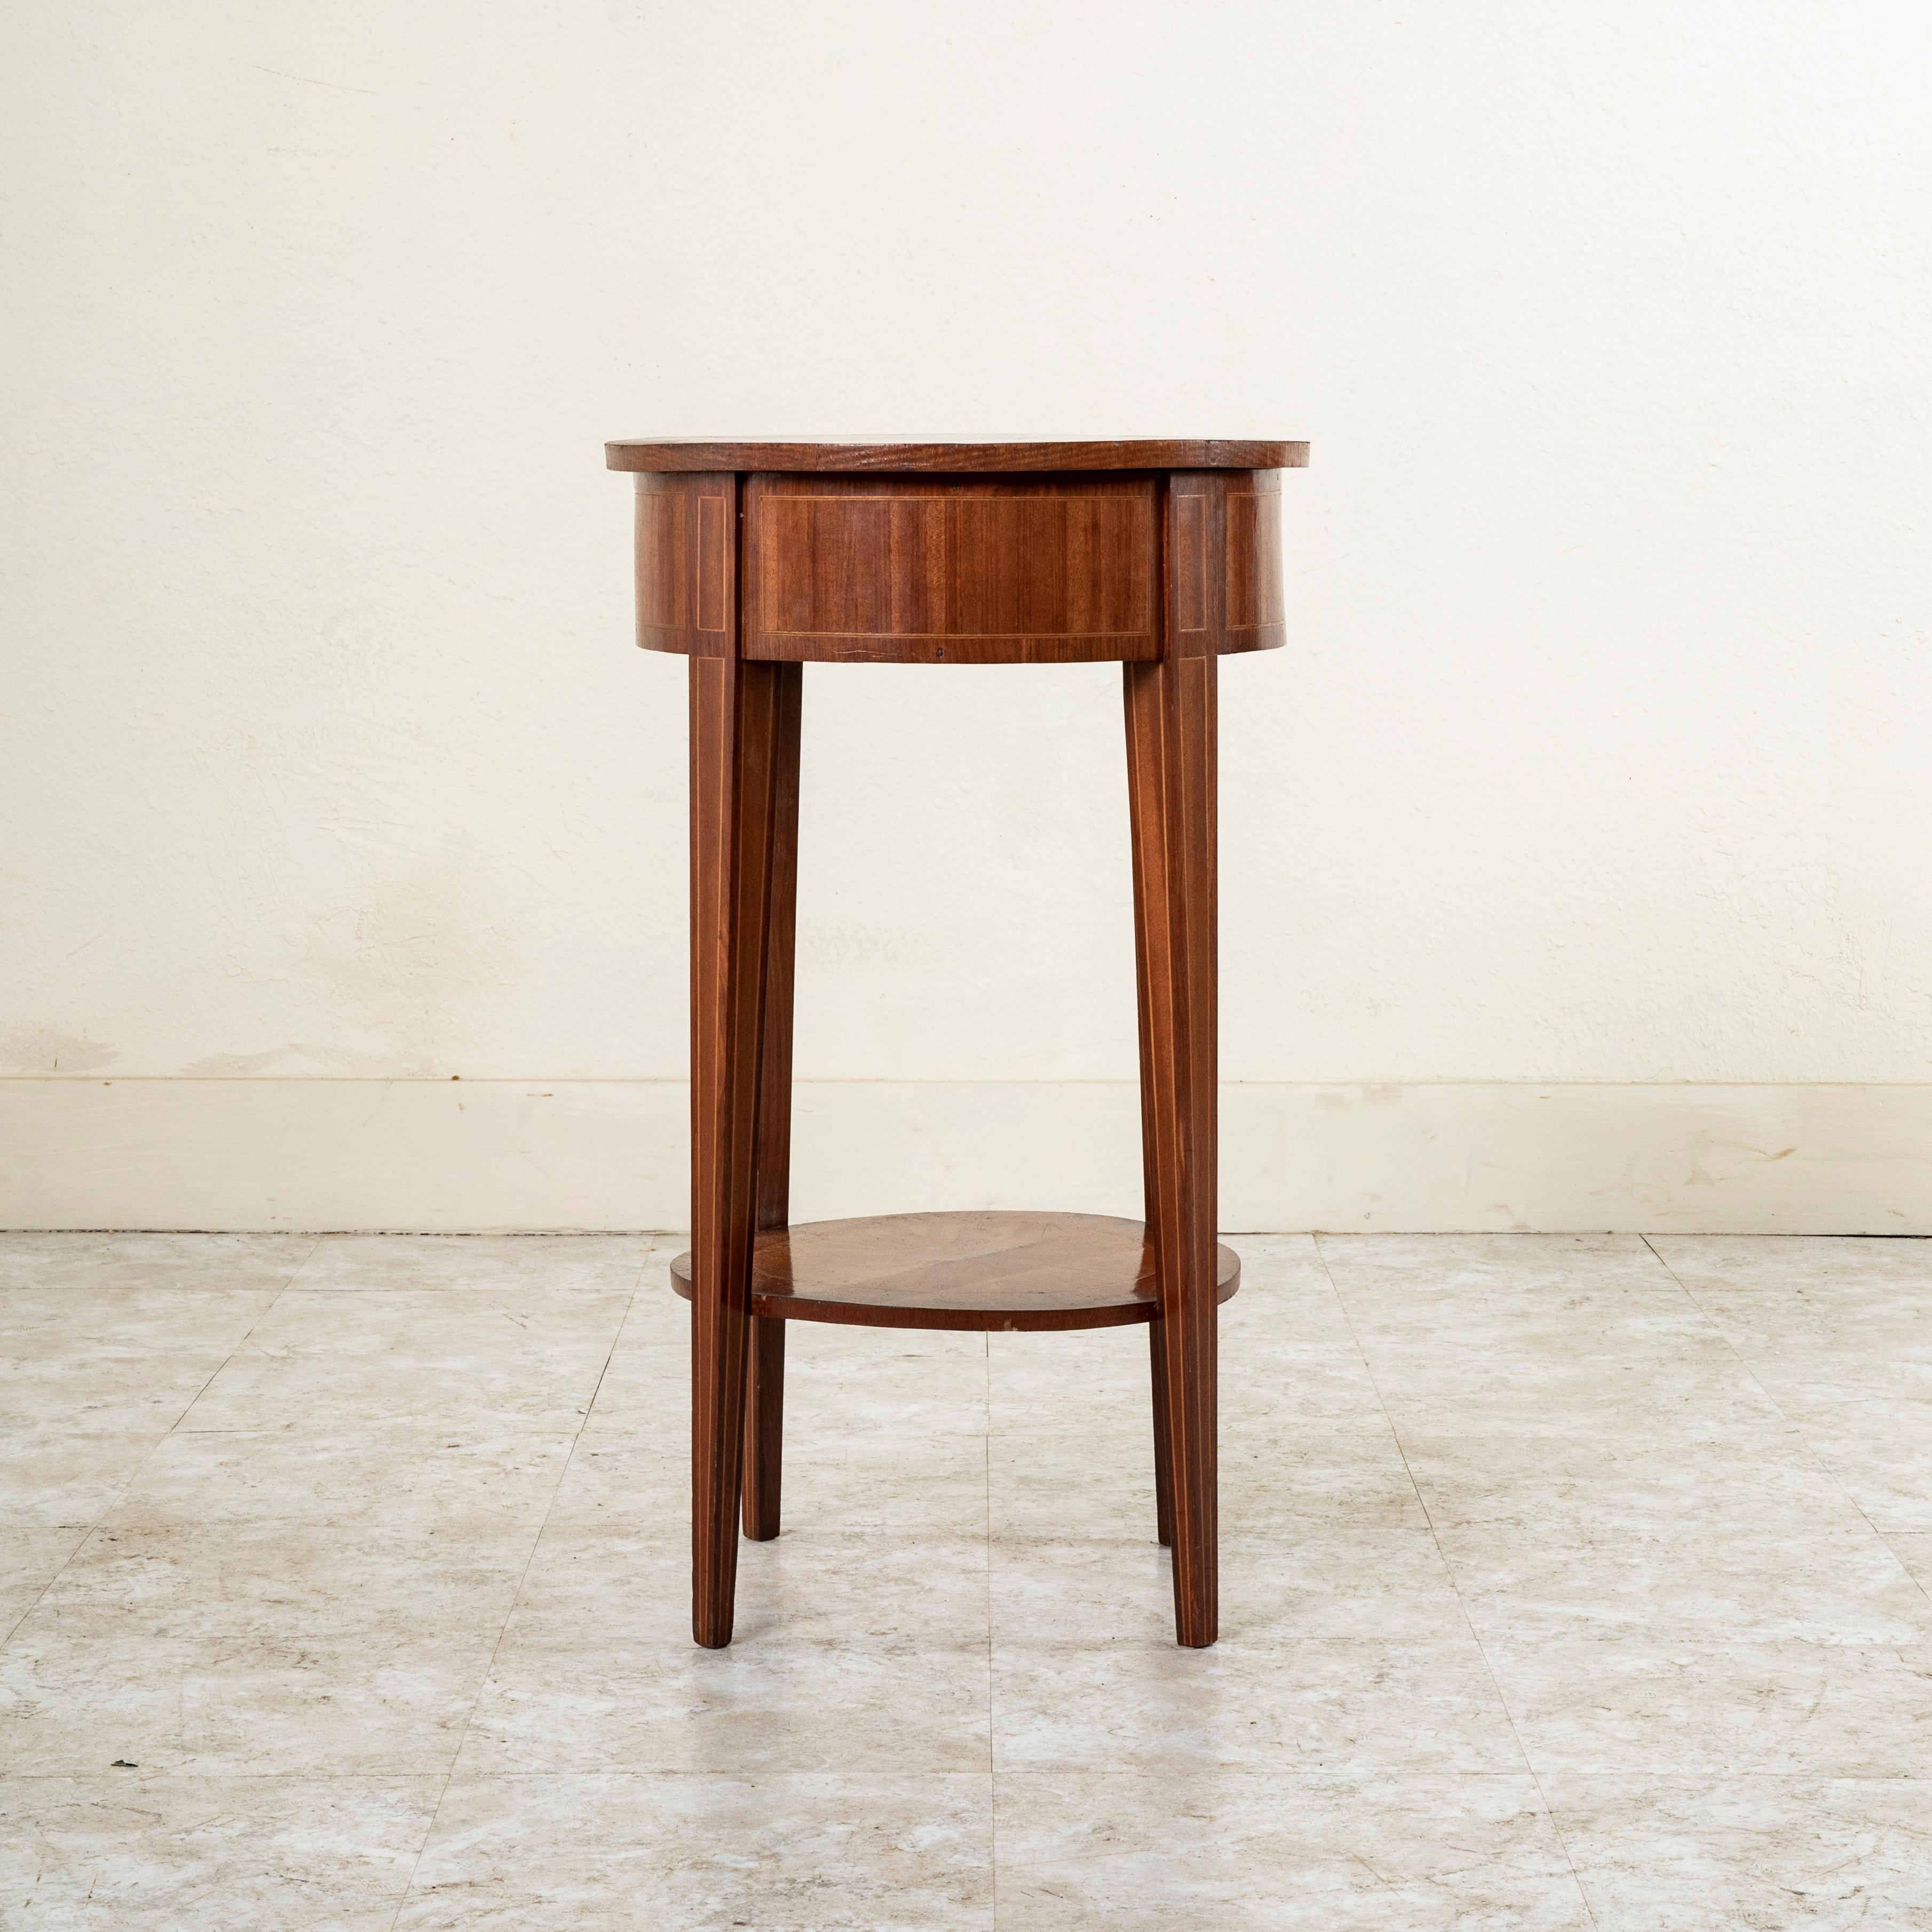 Fruitwood Early 20th Century French Louis XVI Style Rosewood Marquetry Side Table For Sale